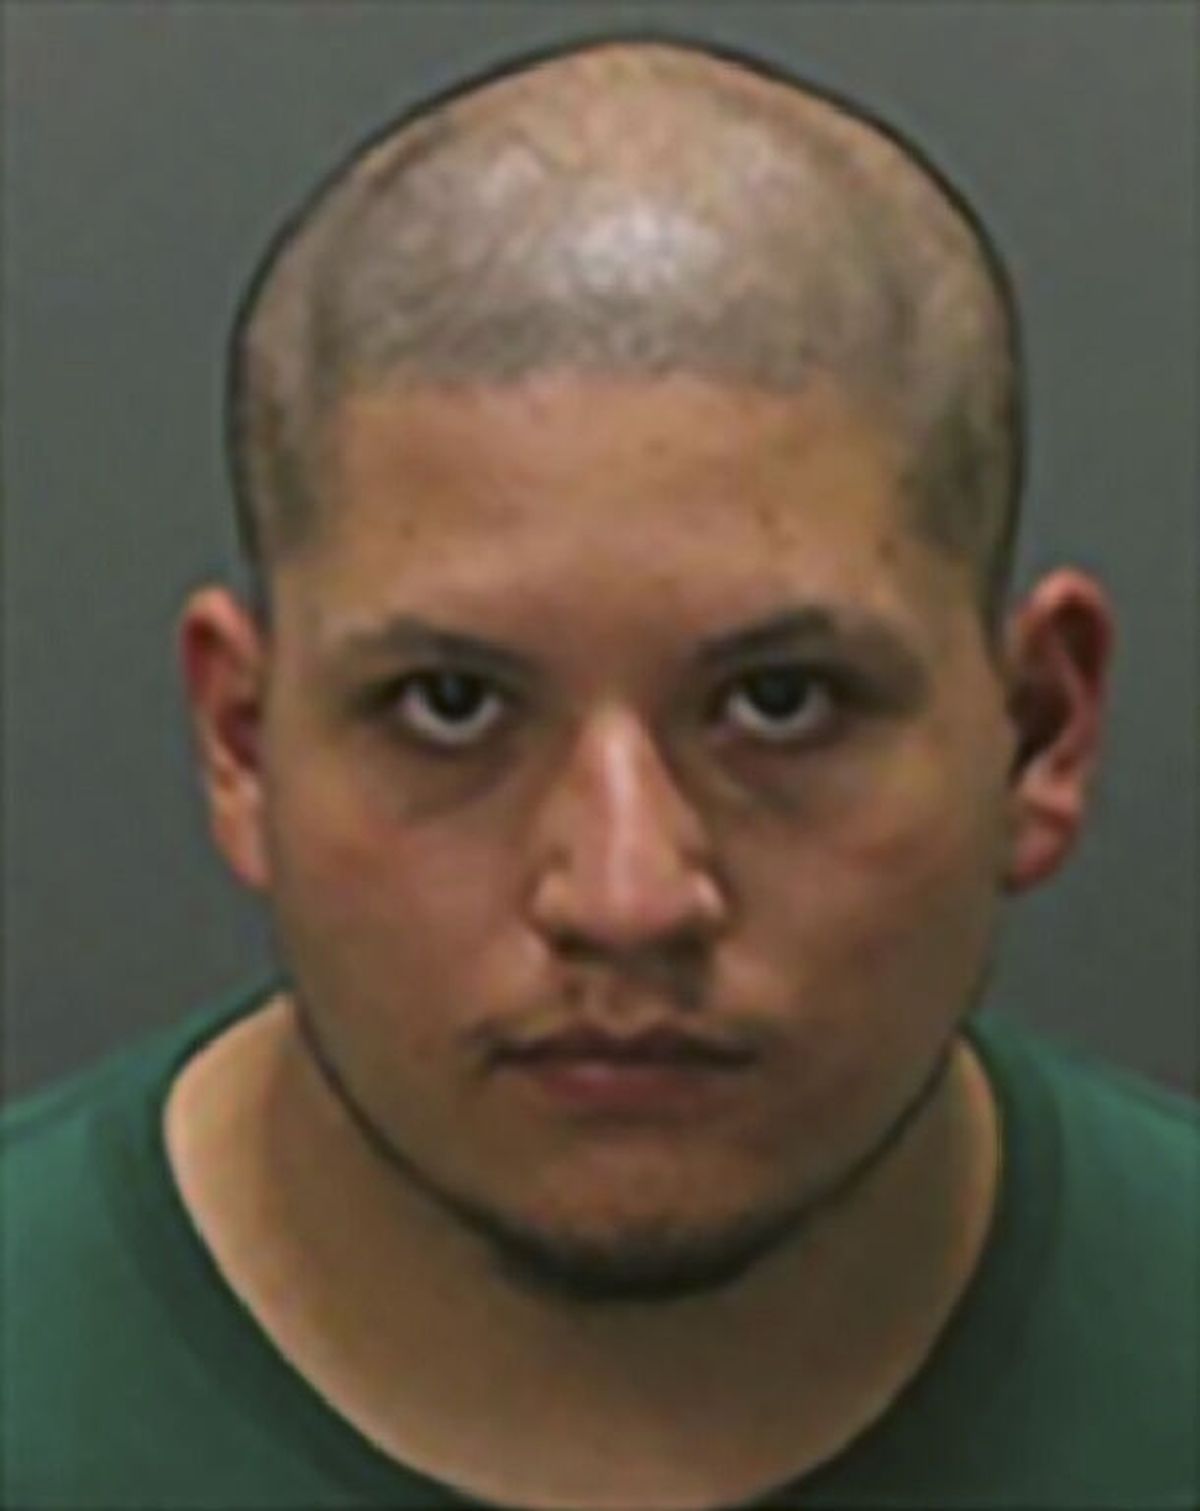 This booking photo released by the Corona, Calif., Police Department shows 20-year-old Joseph Jimenez, who was arrested Tuesday, July 27, 2021, in connection with a shooting that killed an 18-year-old woman and seriously wounded a 19-year-old social media influencer as they watched “The Forever Purge” at a Southern California movie theater. He is being held on $2 million bail.  (HOGP)